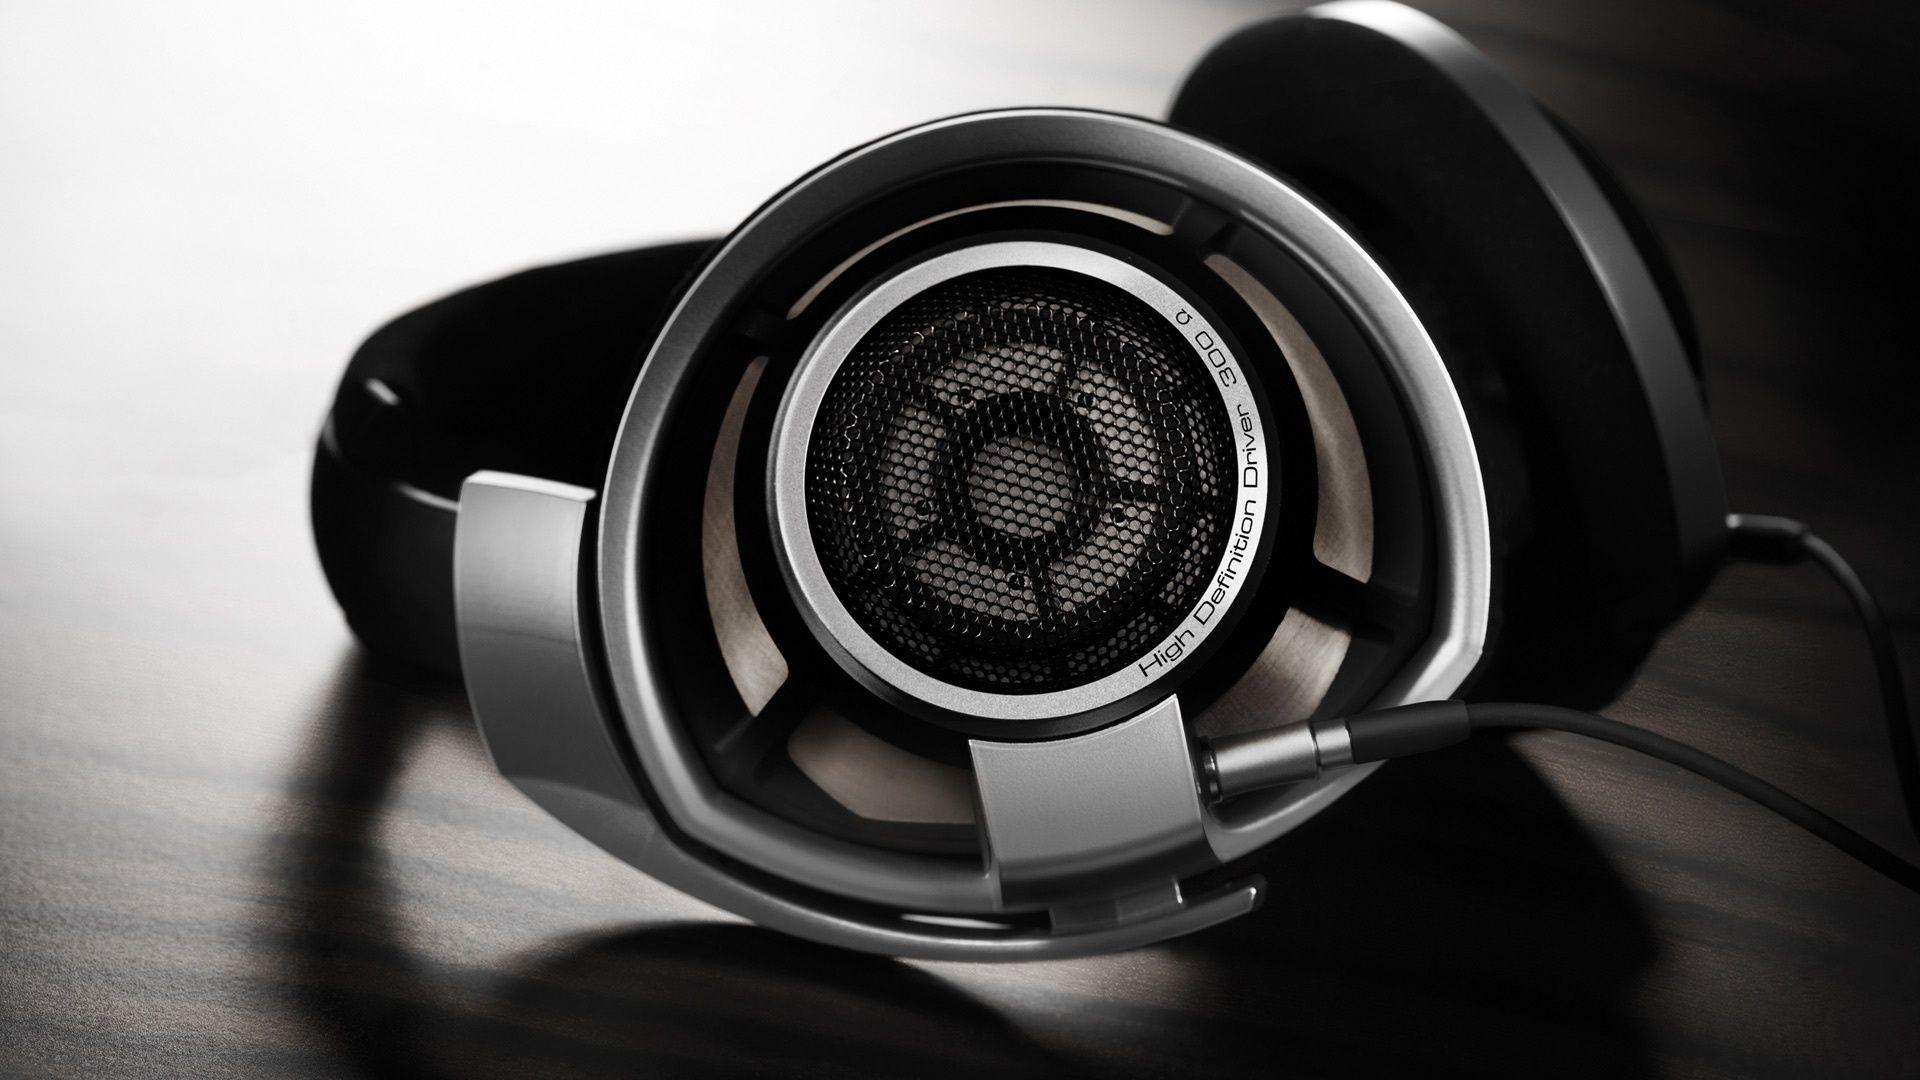 Cool 23 Background, Top Headphone Collection